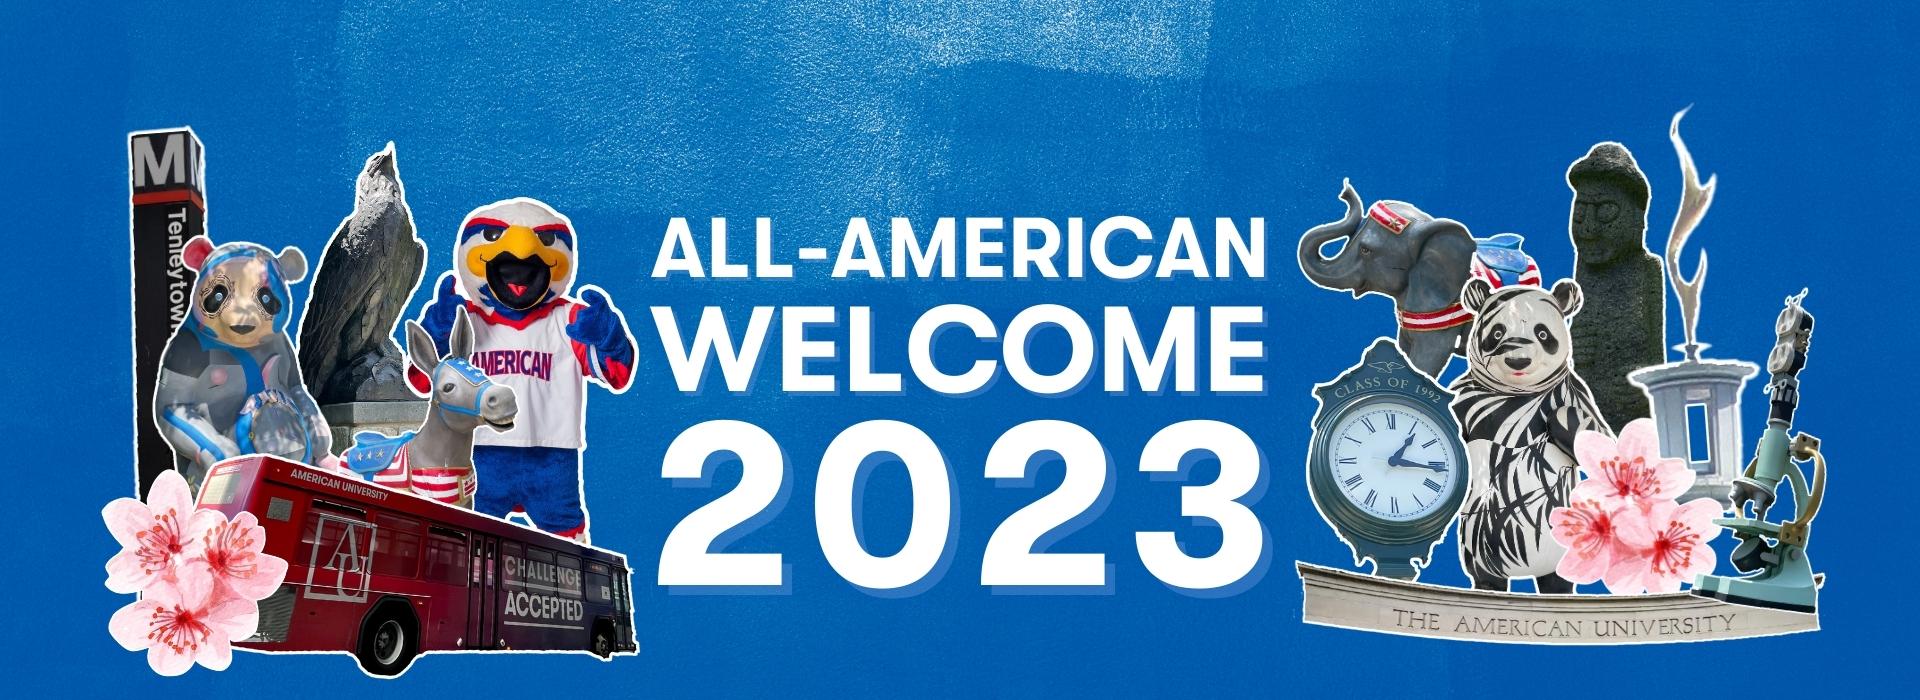 All-American Welcome 2023